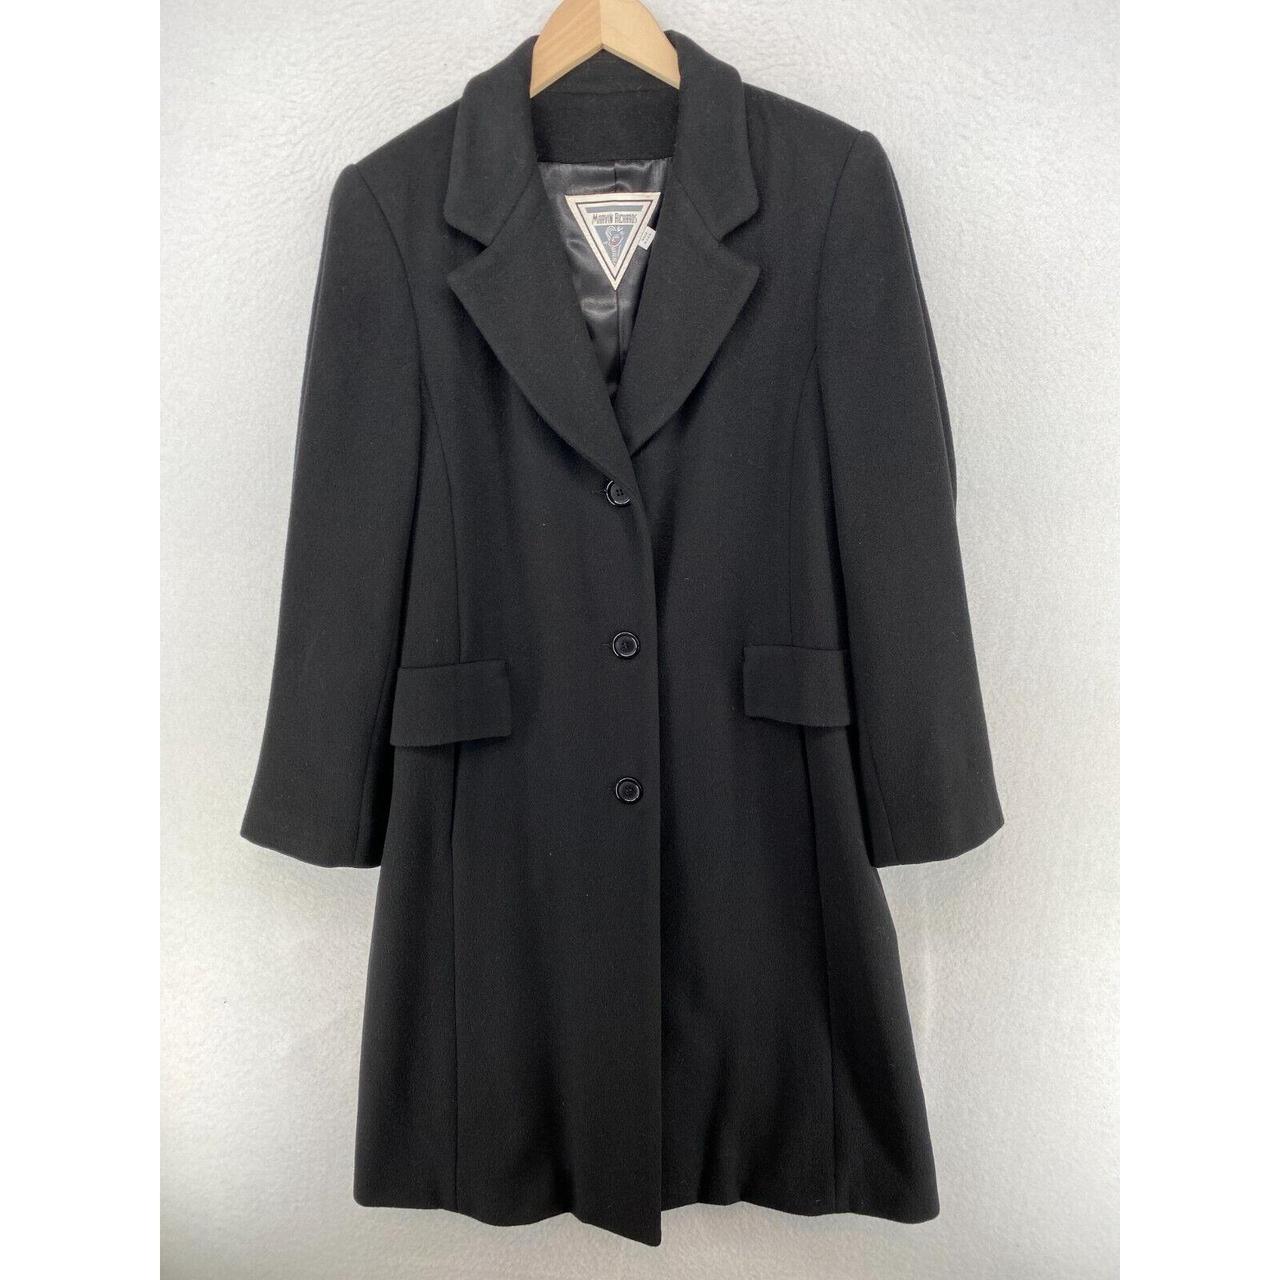 MARVIN RICHARDS Wool Cashmere Coat Womens 6 Lined... - Depop